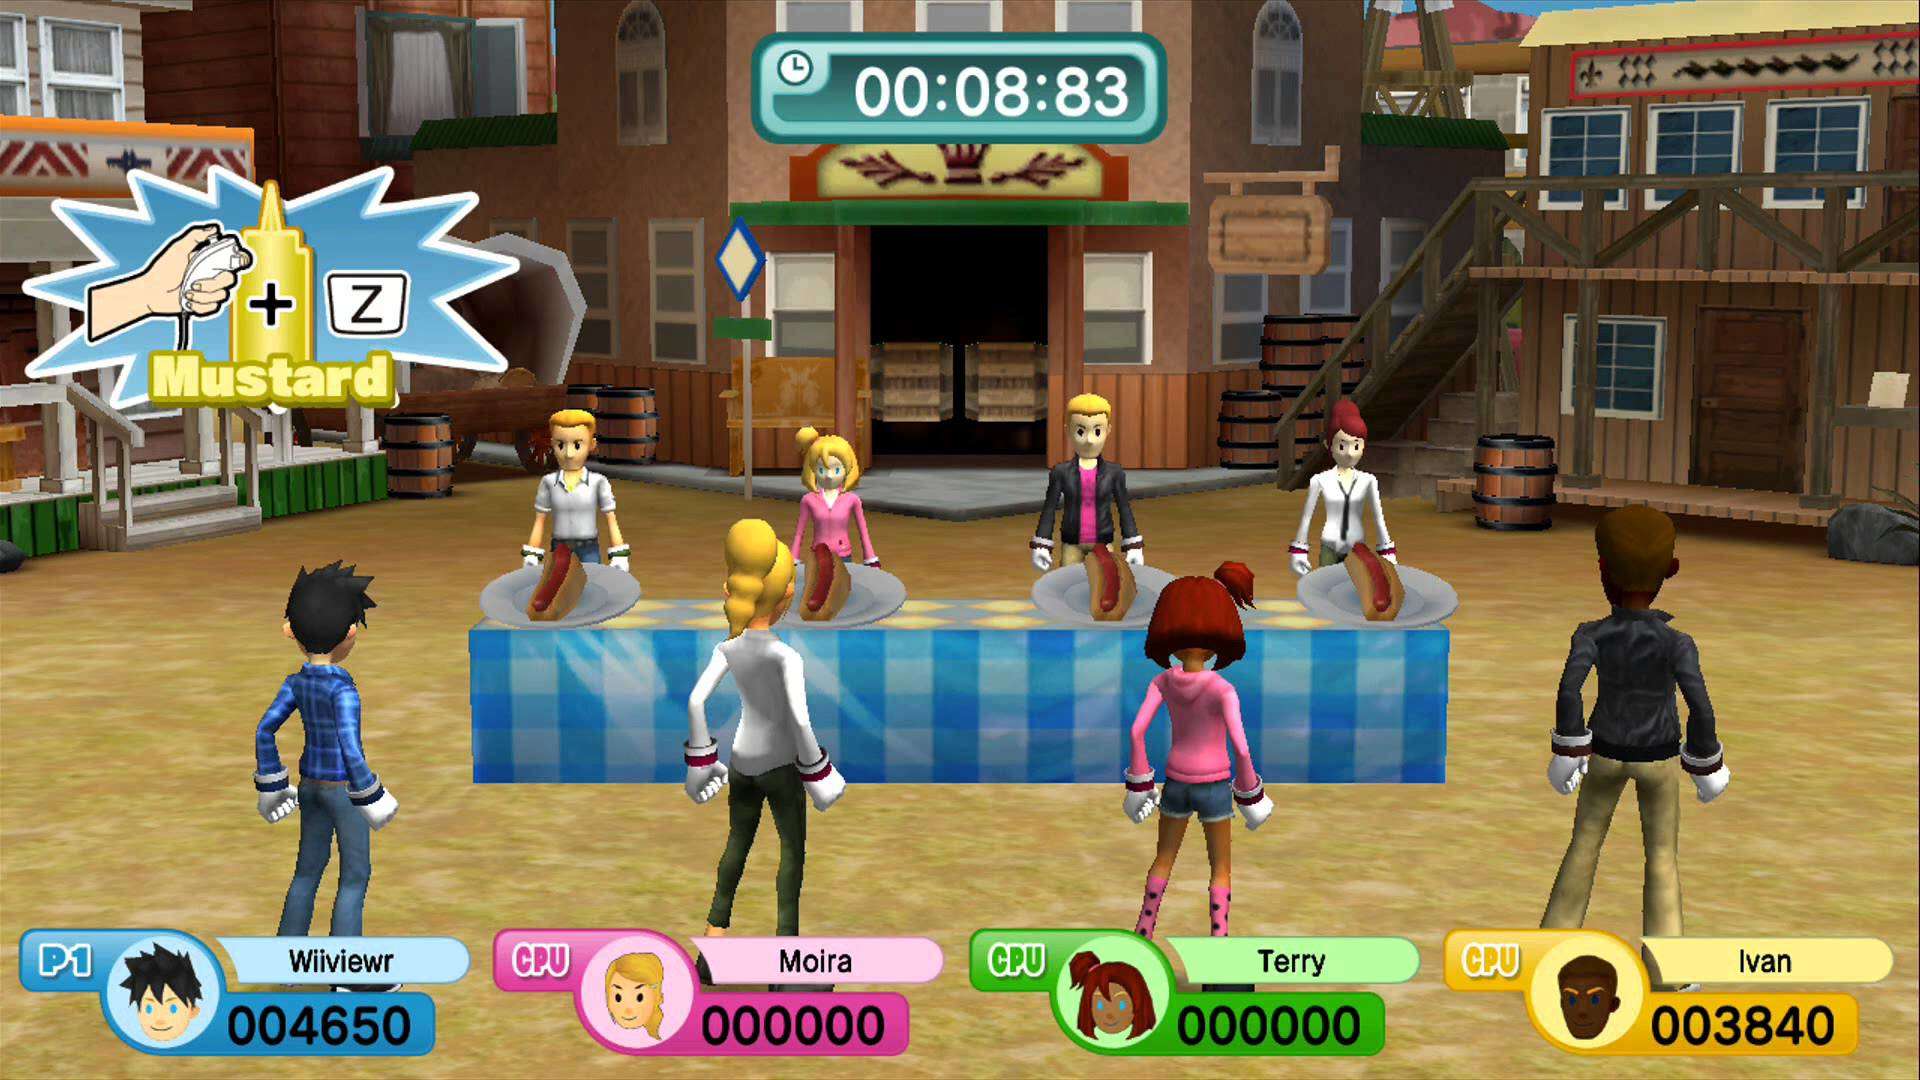 Family games 3. Family Party: 30 great games obstacle Arcade. Wii игры. Family Party игра. Игры на Wii вечеринка.